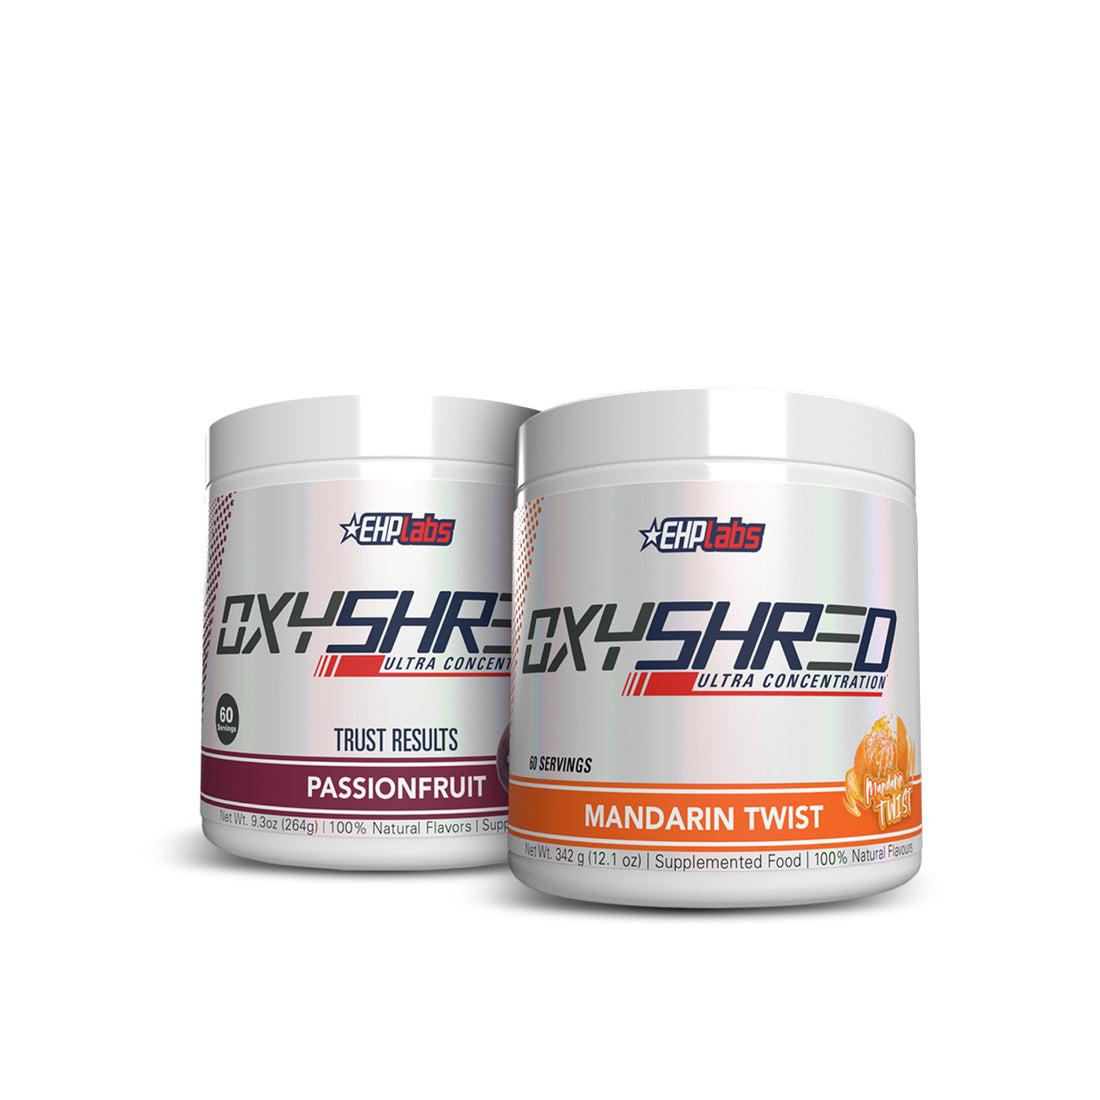 EHP Labs Oxyshred Twin Pack Bundle